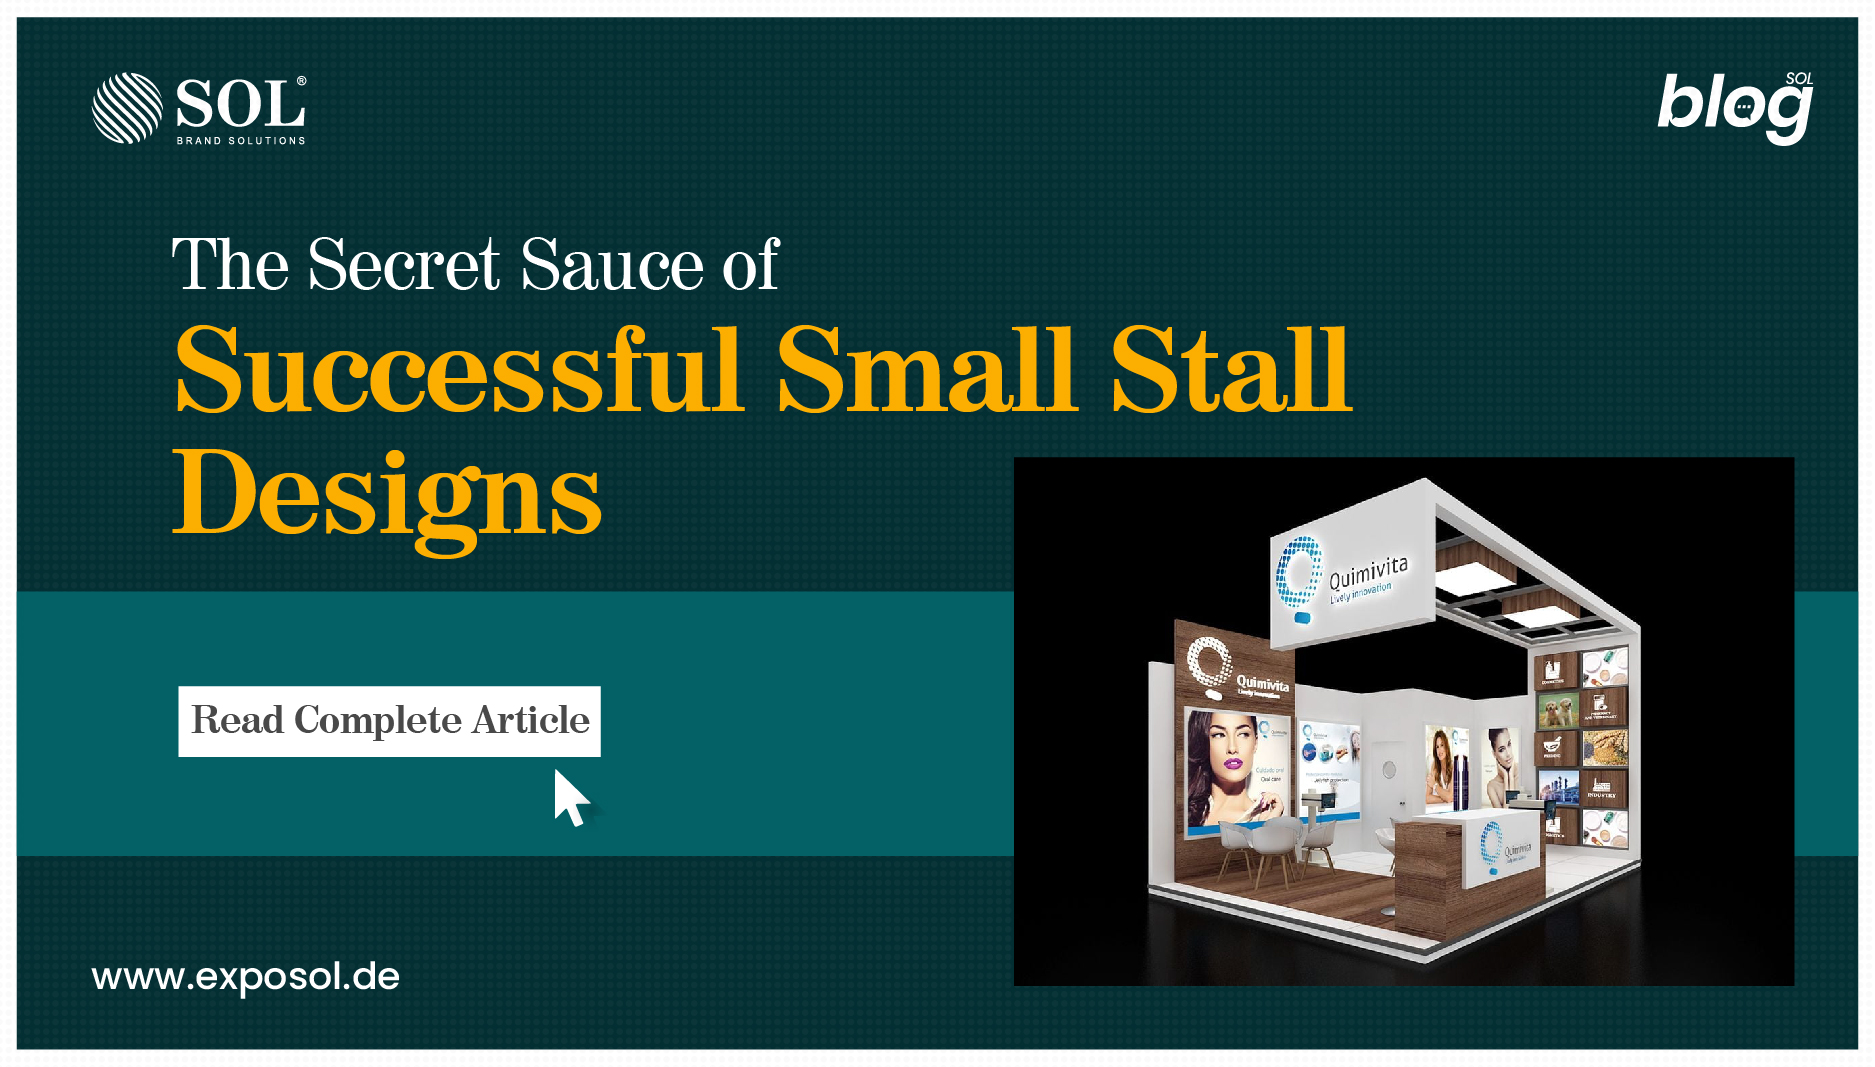 Standing Out: Your Expo Presence with Ingenious Small Stall Design